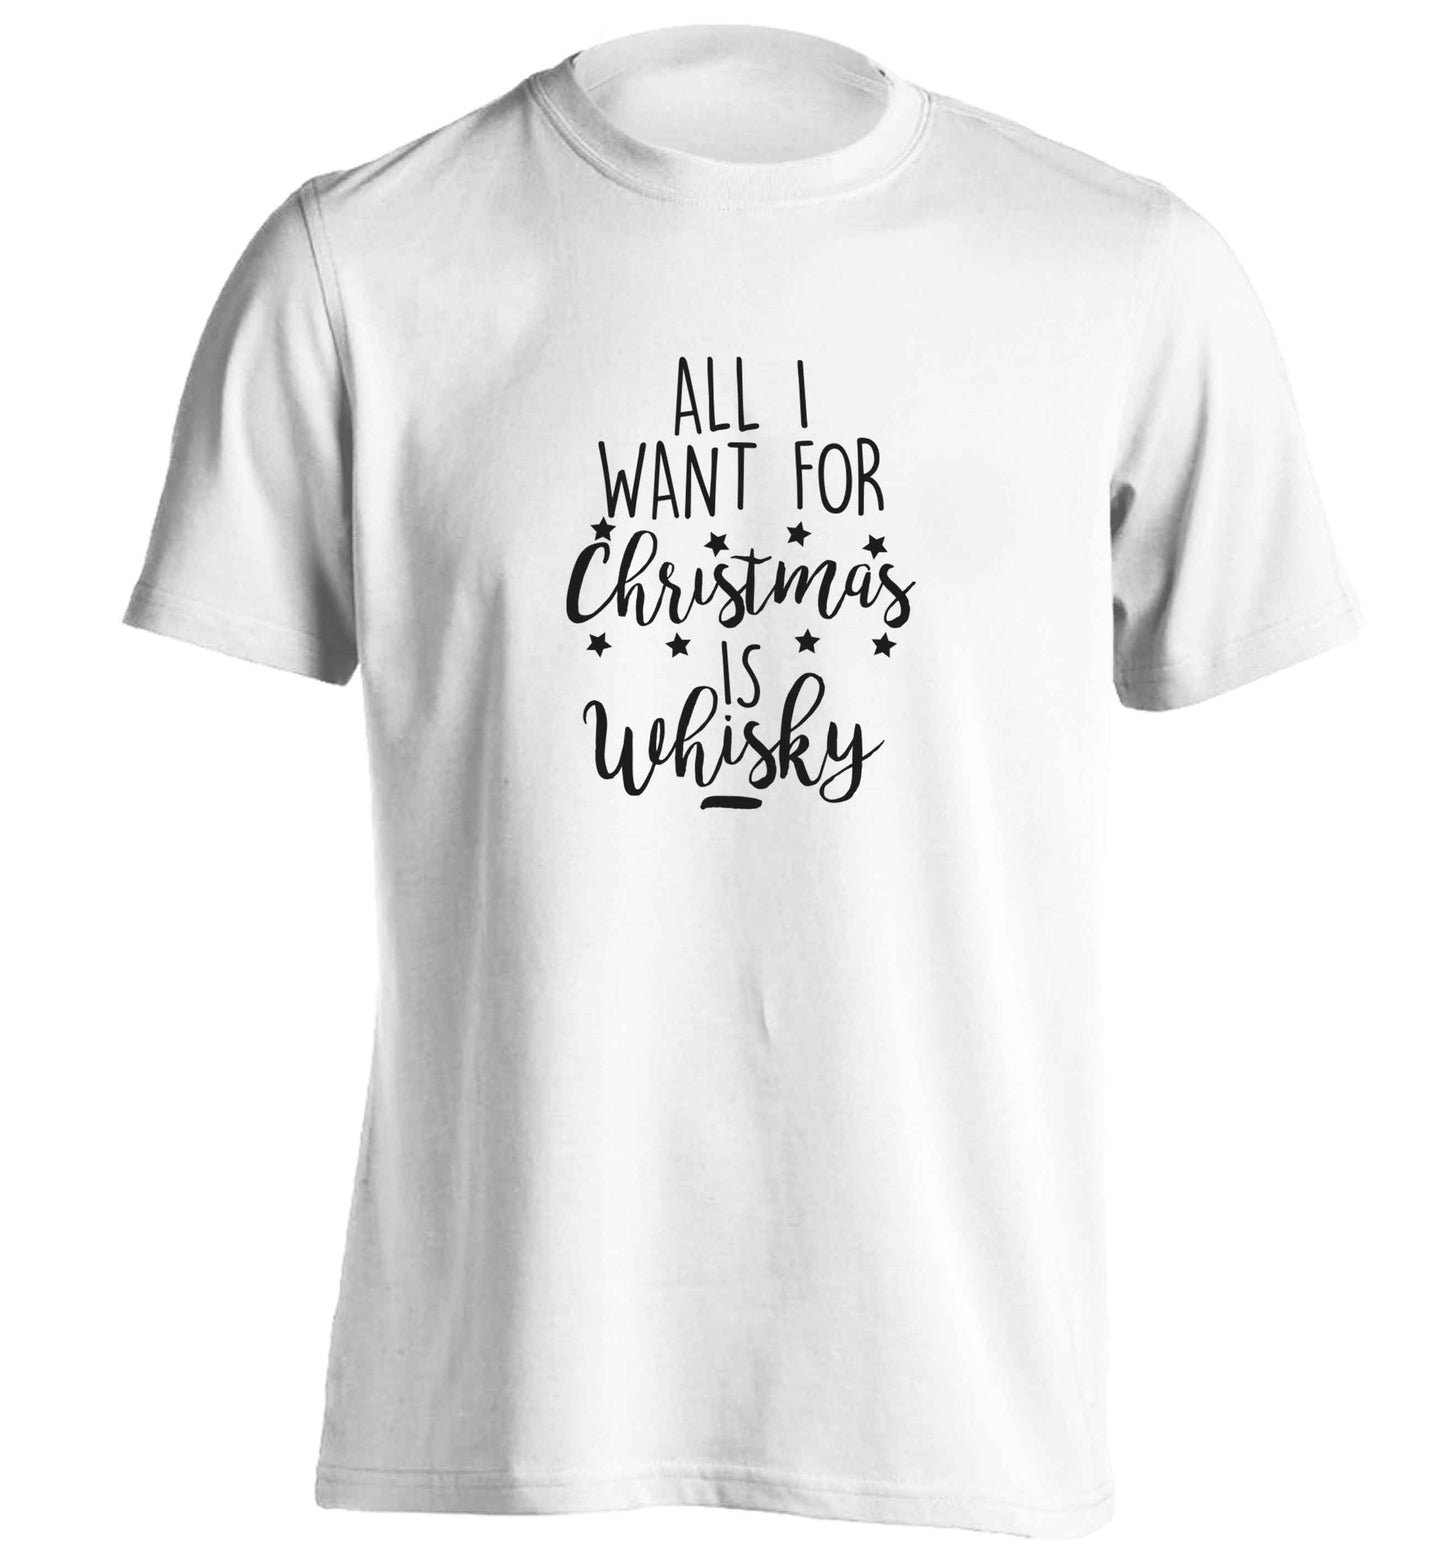 All I want for Christmas is whisky adults unisex white Tshirt 2XL